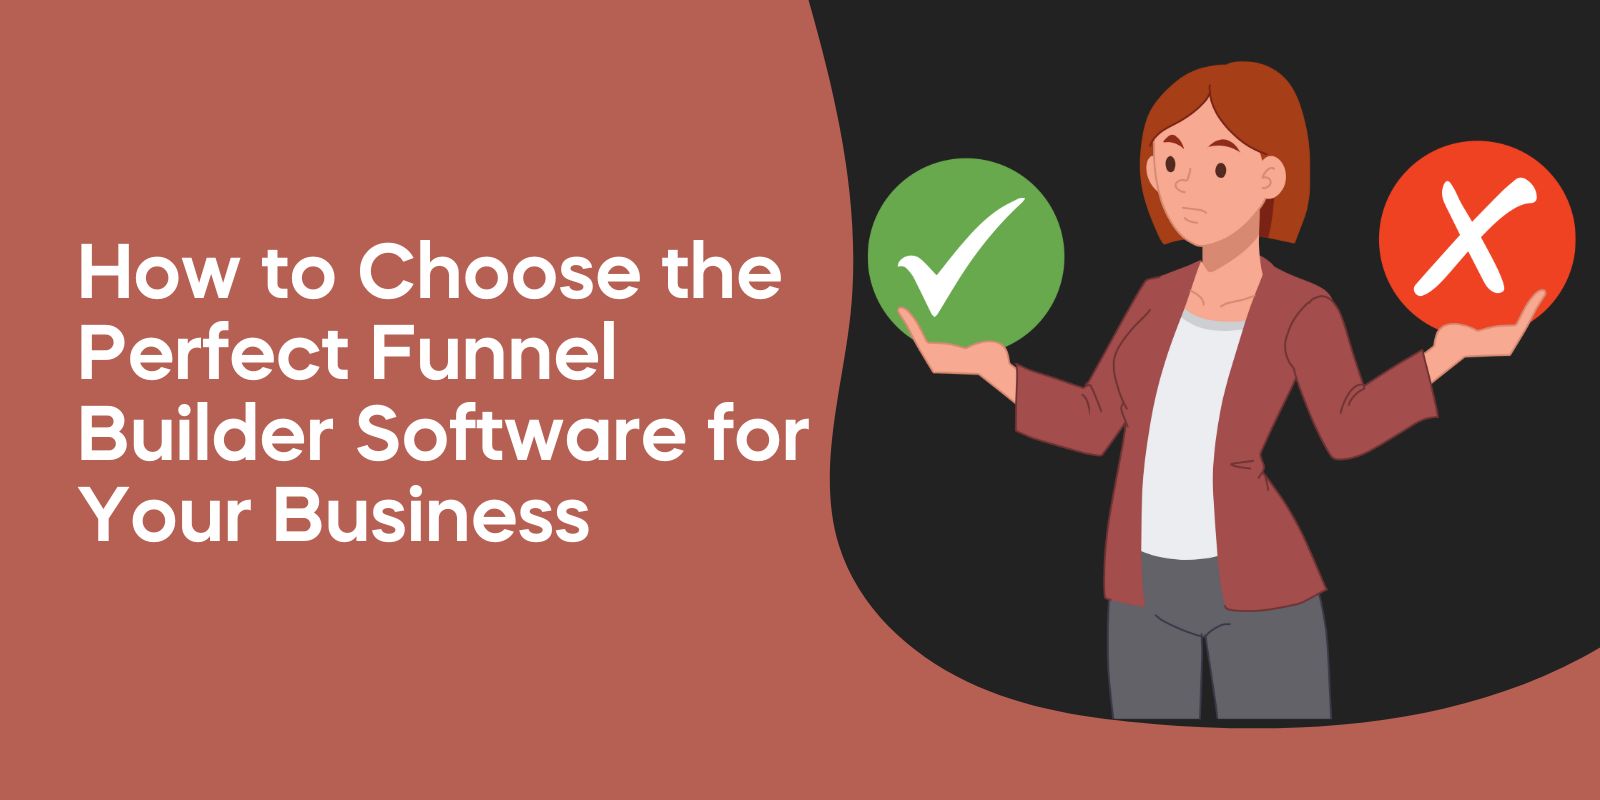 How to Choose the Perfect Funnel Builder Software